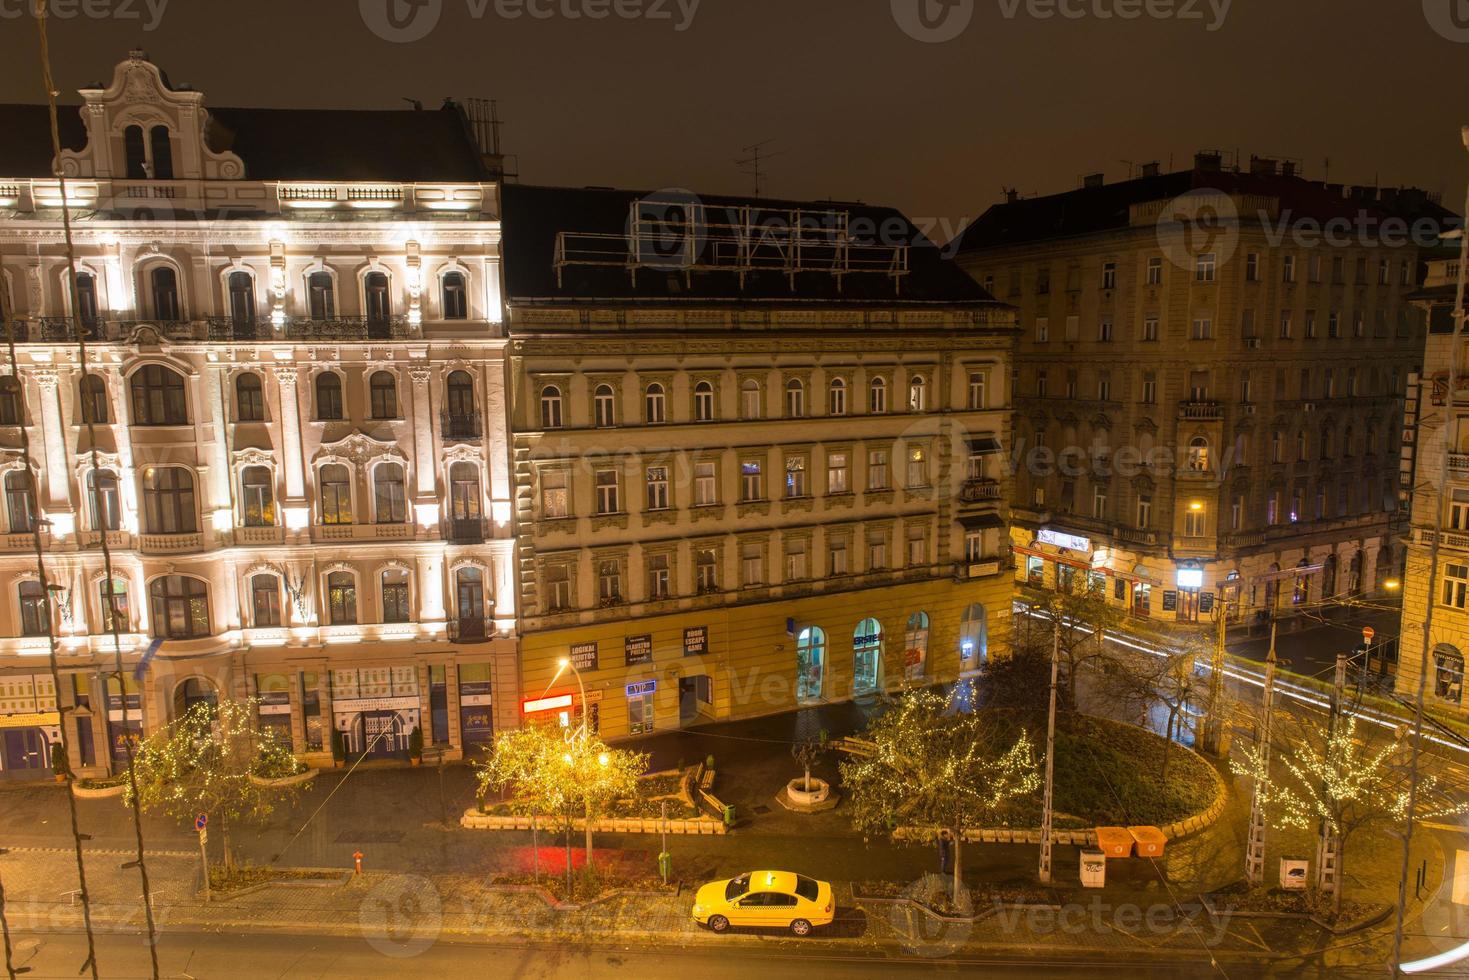 Central Budapest Street View photo